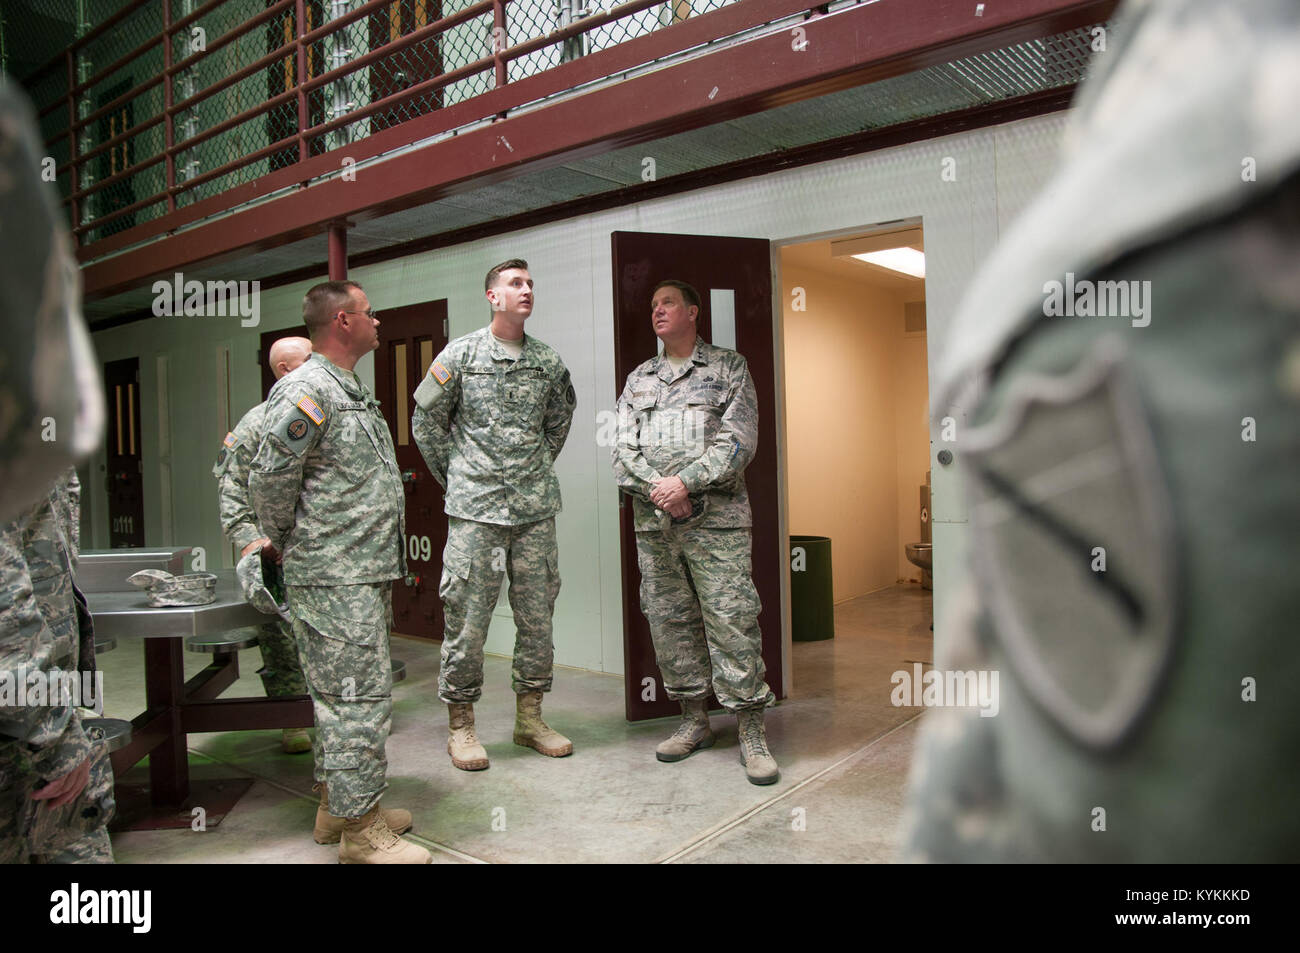 Air Force Maj. Gen. Edward Tonini, adjutant general for the state of Kentucky, is briefed about the use of communal areas, by Army 1 Lt. Joseph Smith, the assistant officer in charge of Camp V, inside Camp V at U.S. Naval Station Guantanamo Bay, Cuba Dec. 3, 2013. Tonini came to the island to visit with Kentucky Guardsmen deployed to GTMO in support of public affairs operations there. (Army National Guard photo by Sgt. David Bolton/133rd Mobile Public Affairs Detachment/Joint Task Force-GTMO Public Affairs) Stock Photo